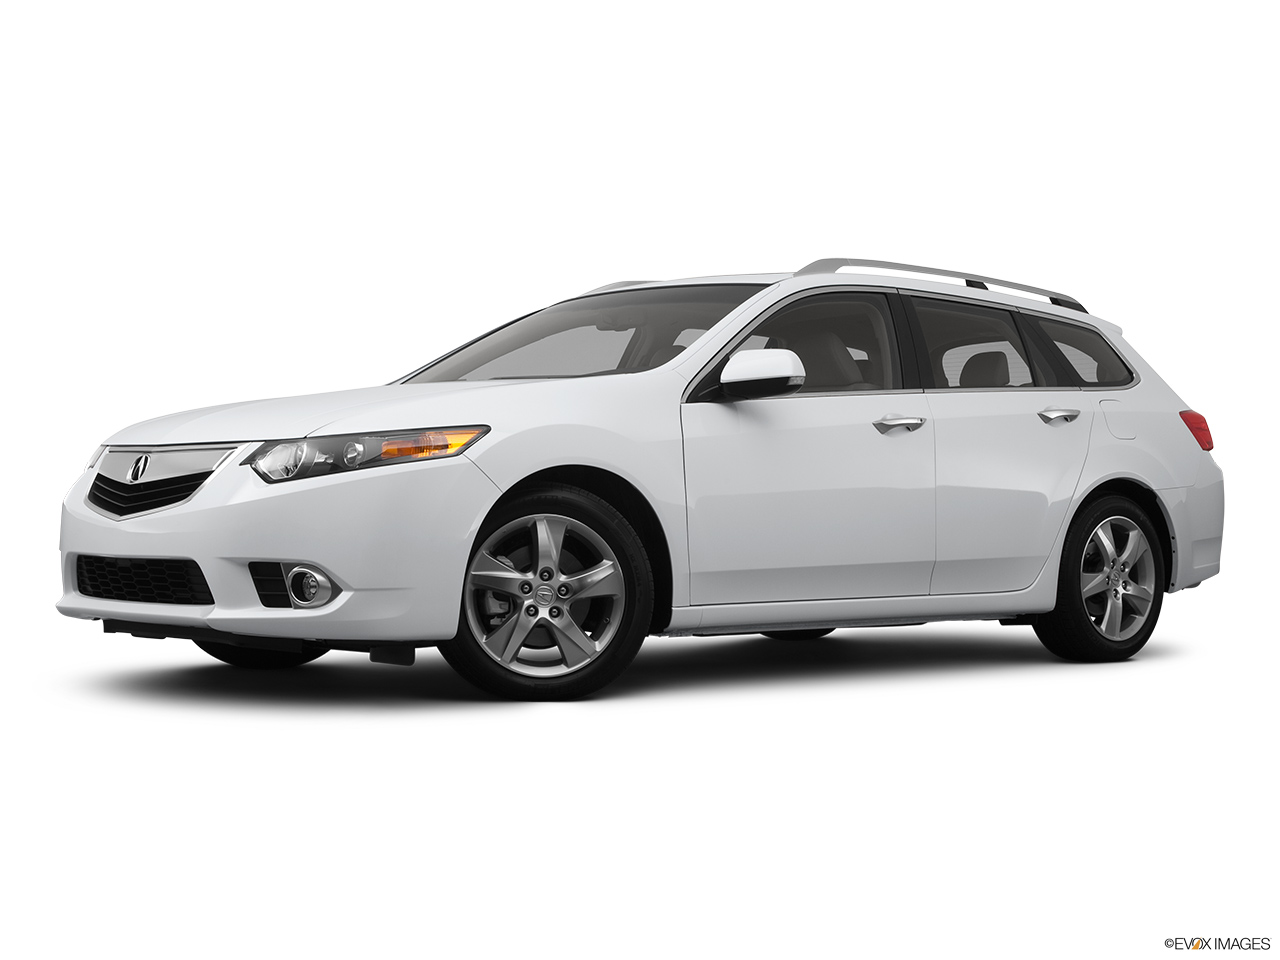 2012 Acura TSX Sport Wagon Low/wide front 5/8. 